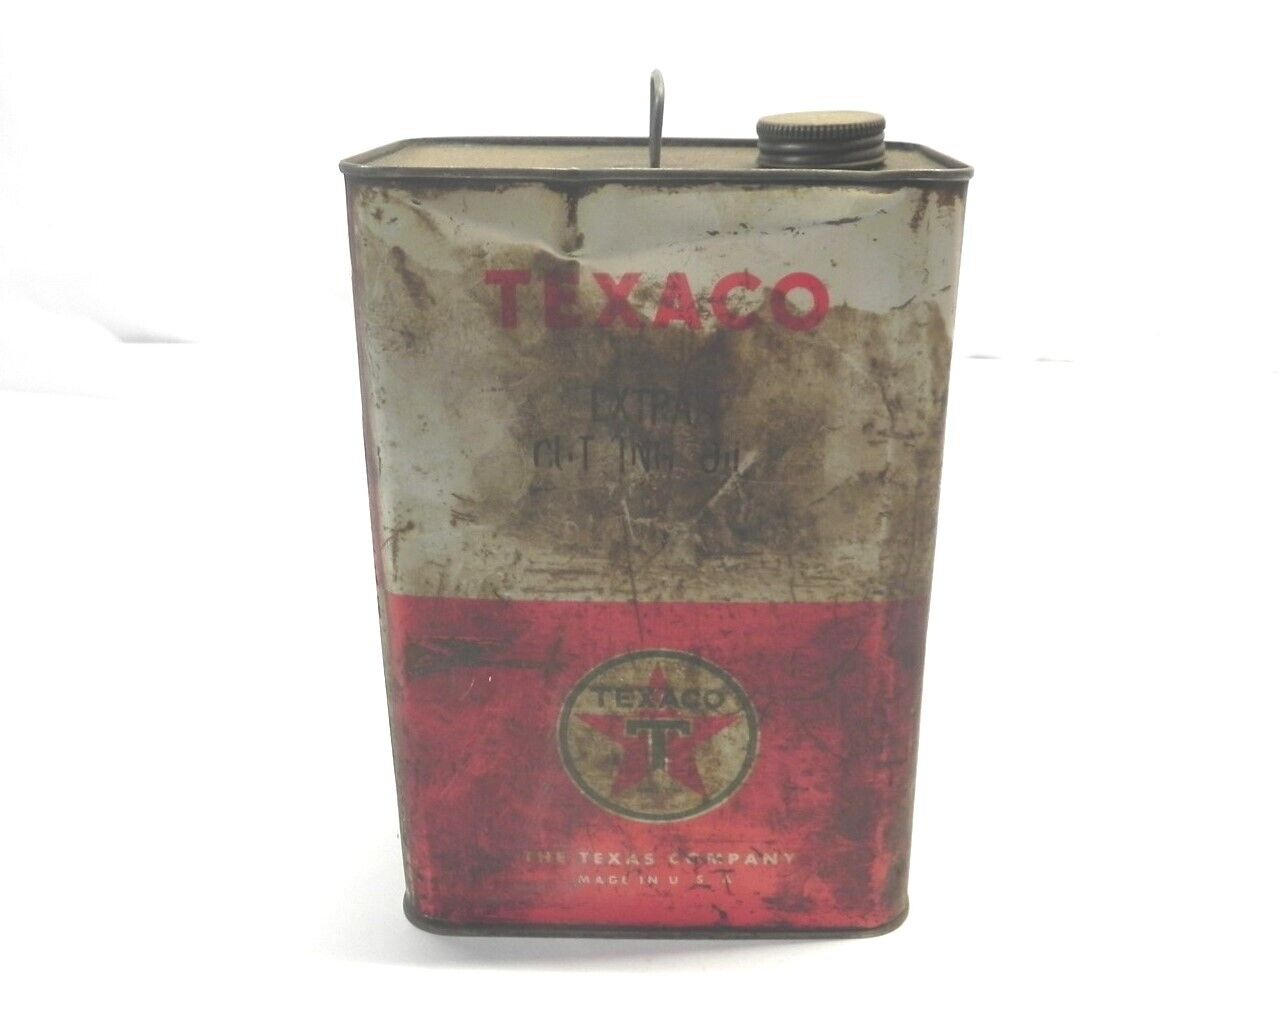 VINTAGE TEXACO EXTRA CUTTING OIL 1 GALLON CAN *EMPTY* PRE-OWNED DENTS DIRTY 